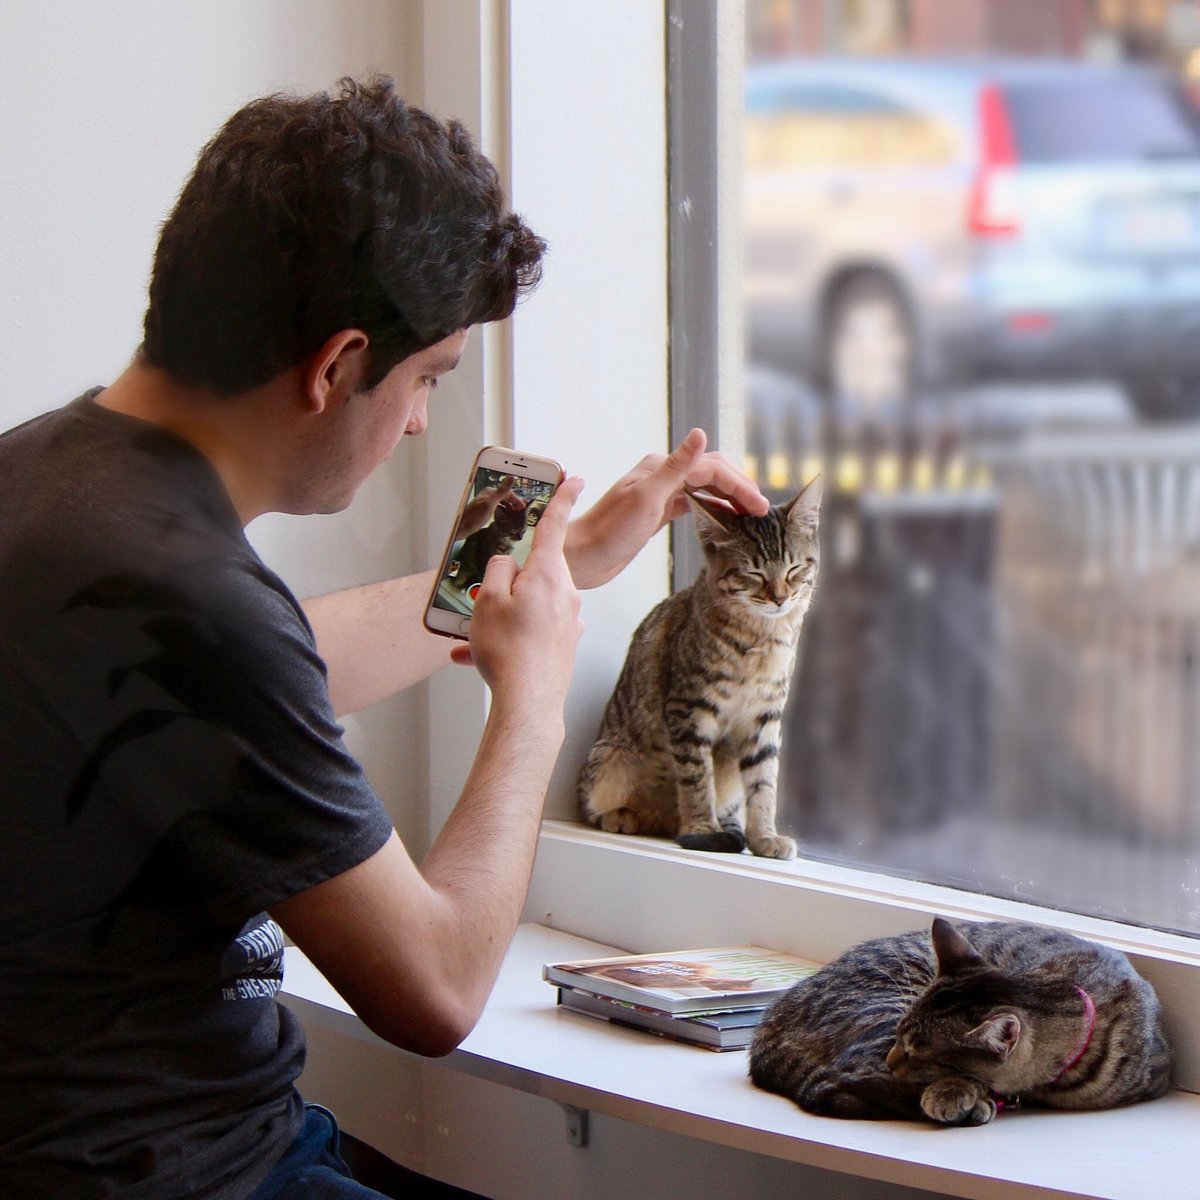 The Passionate Foodie: Rant: Should We Have Cat Cafes in Boston?